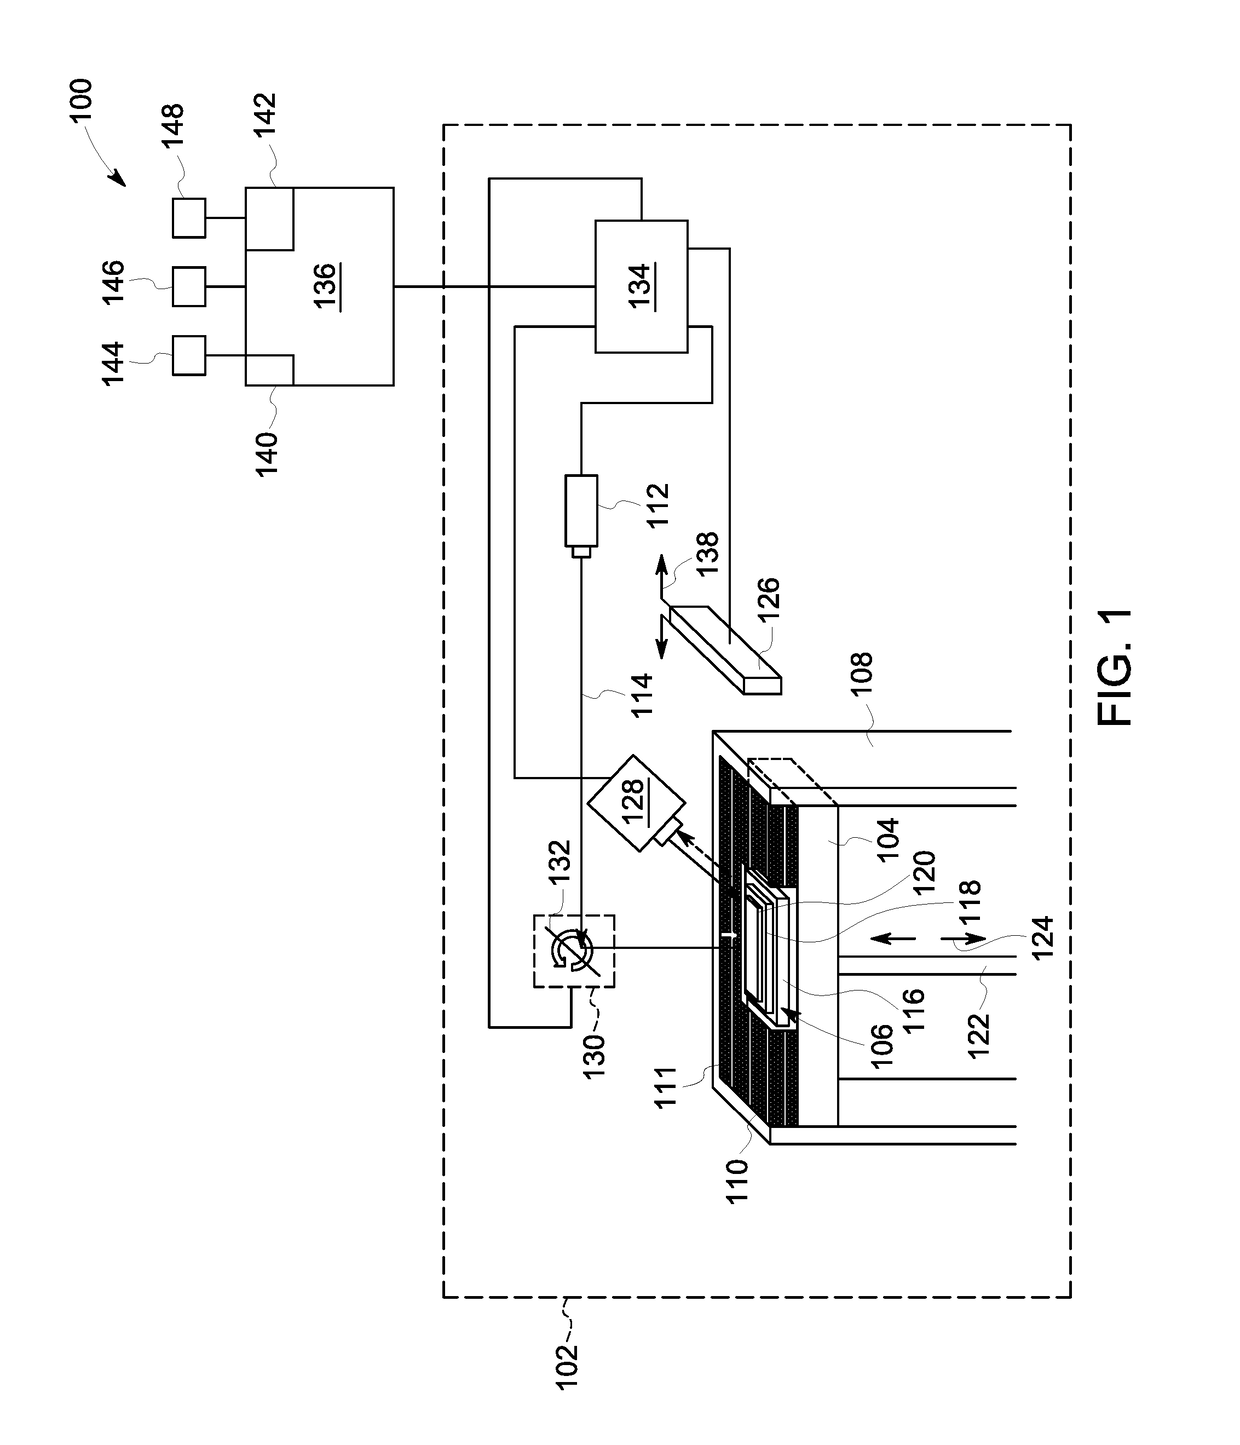 Imaging devices for use with additive manufacturing systems and methods of monitoring and inspecting additive manufacturing components